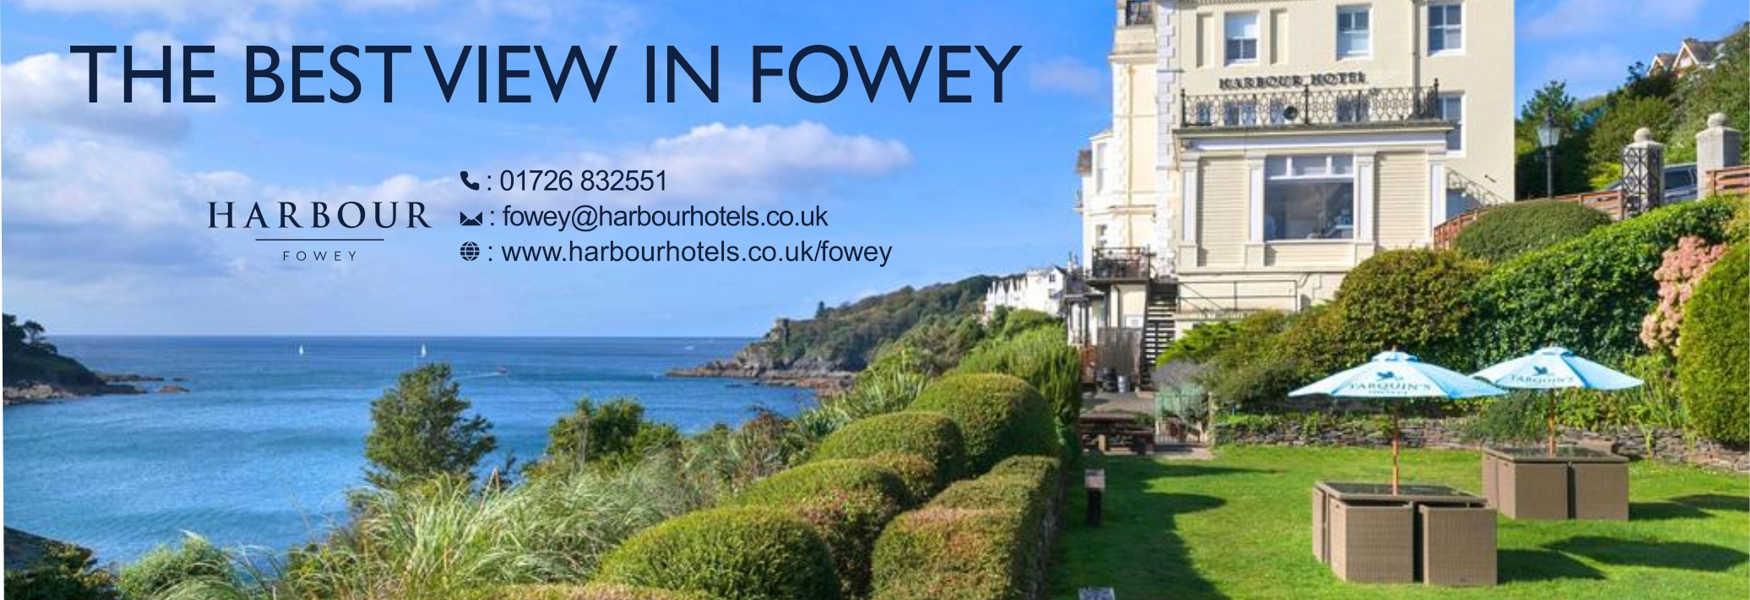 The View from the Fowey Harbour Hotel